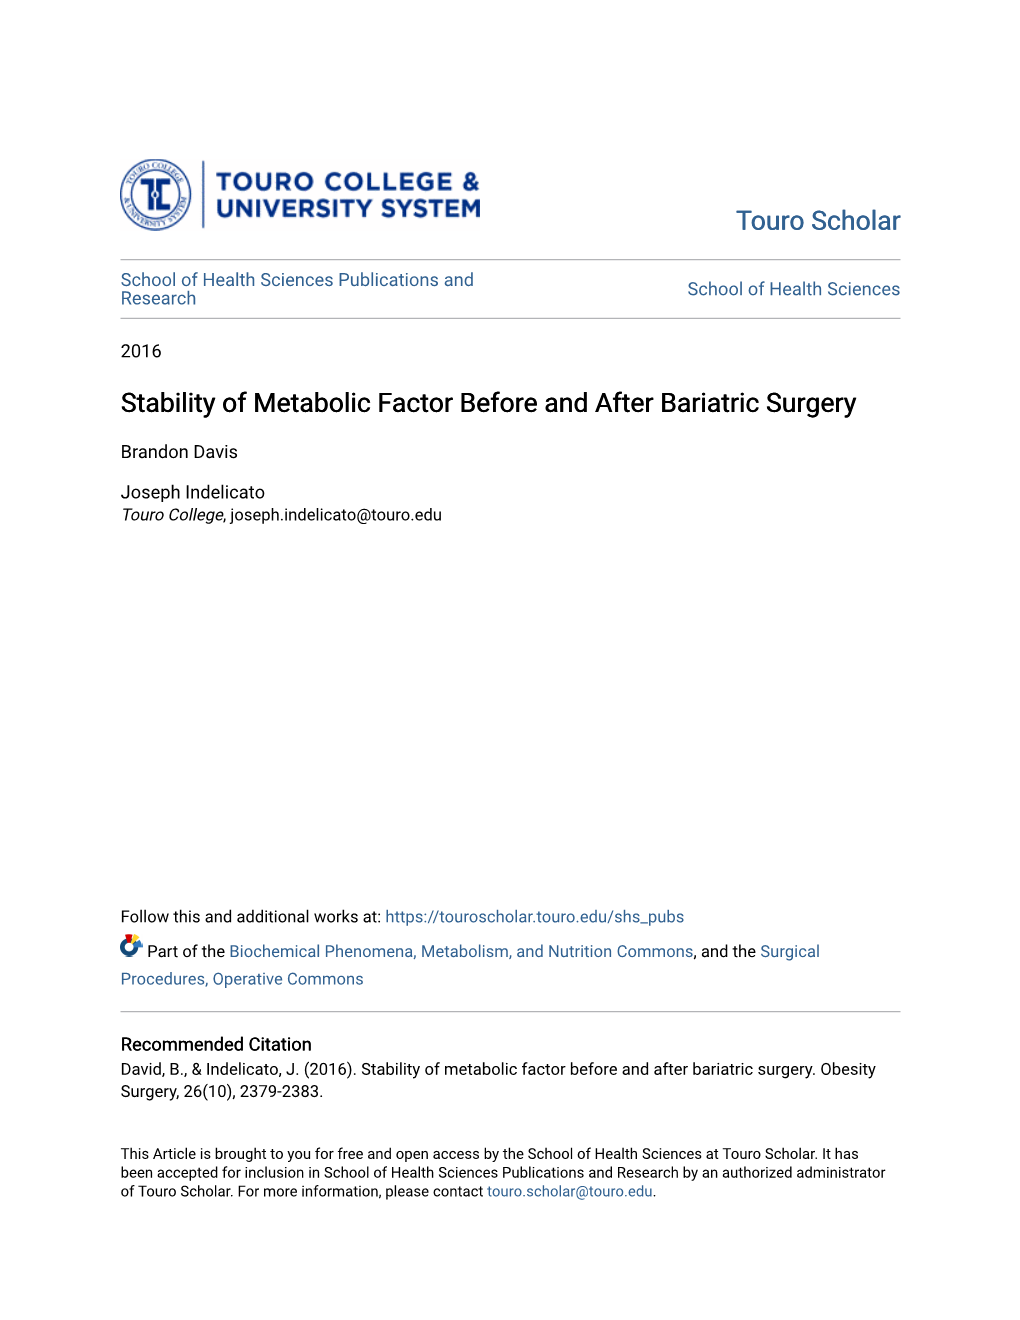 Stability of Metabolic Factor Before and After Bariatric Surgery